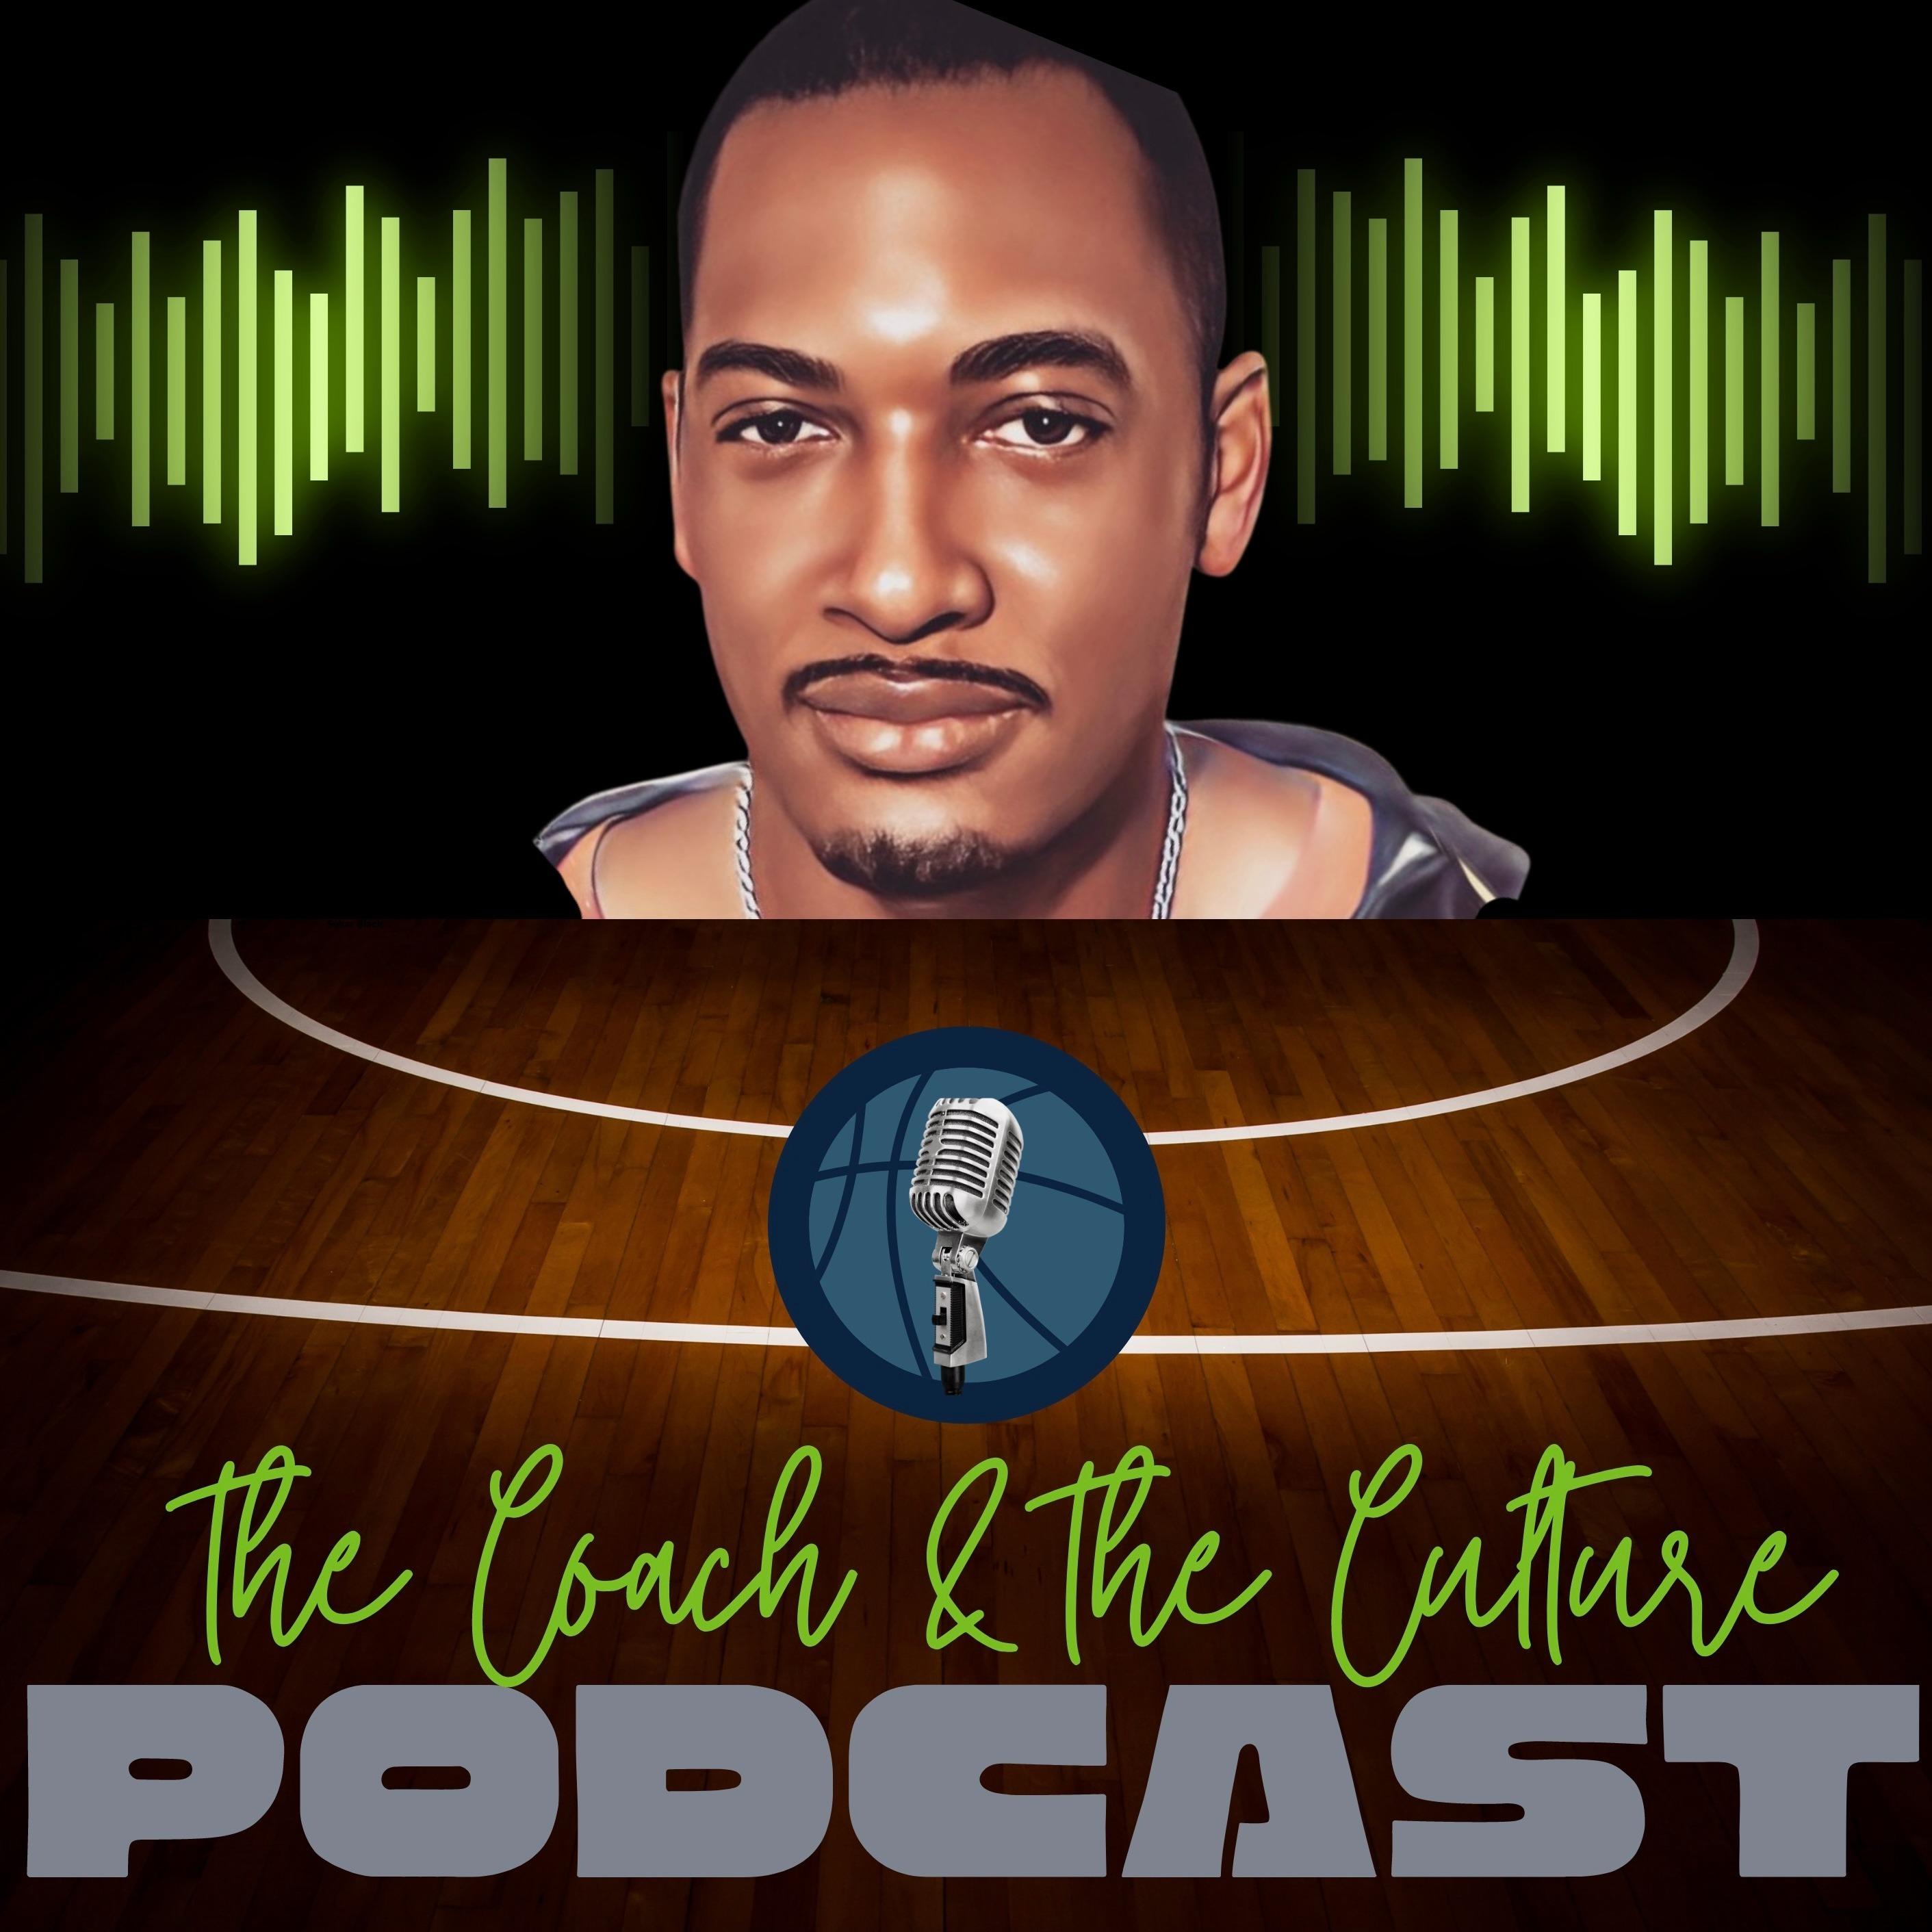 The Coach & The Culture Podcast